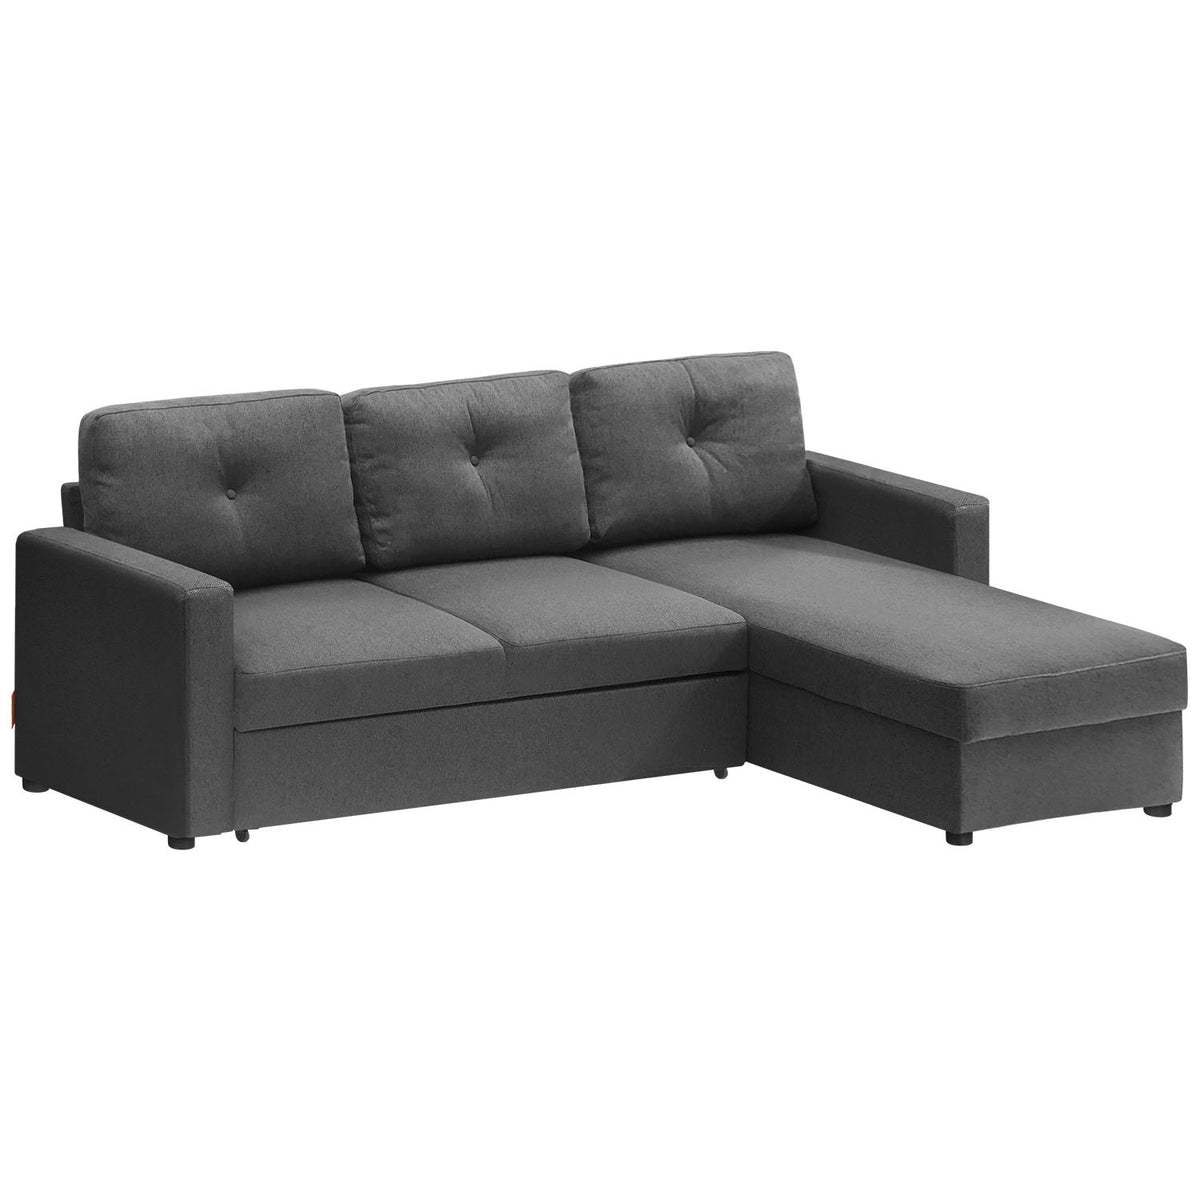 Sofa-Bed (Right Side)